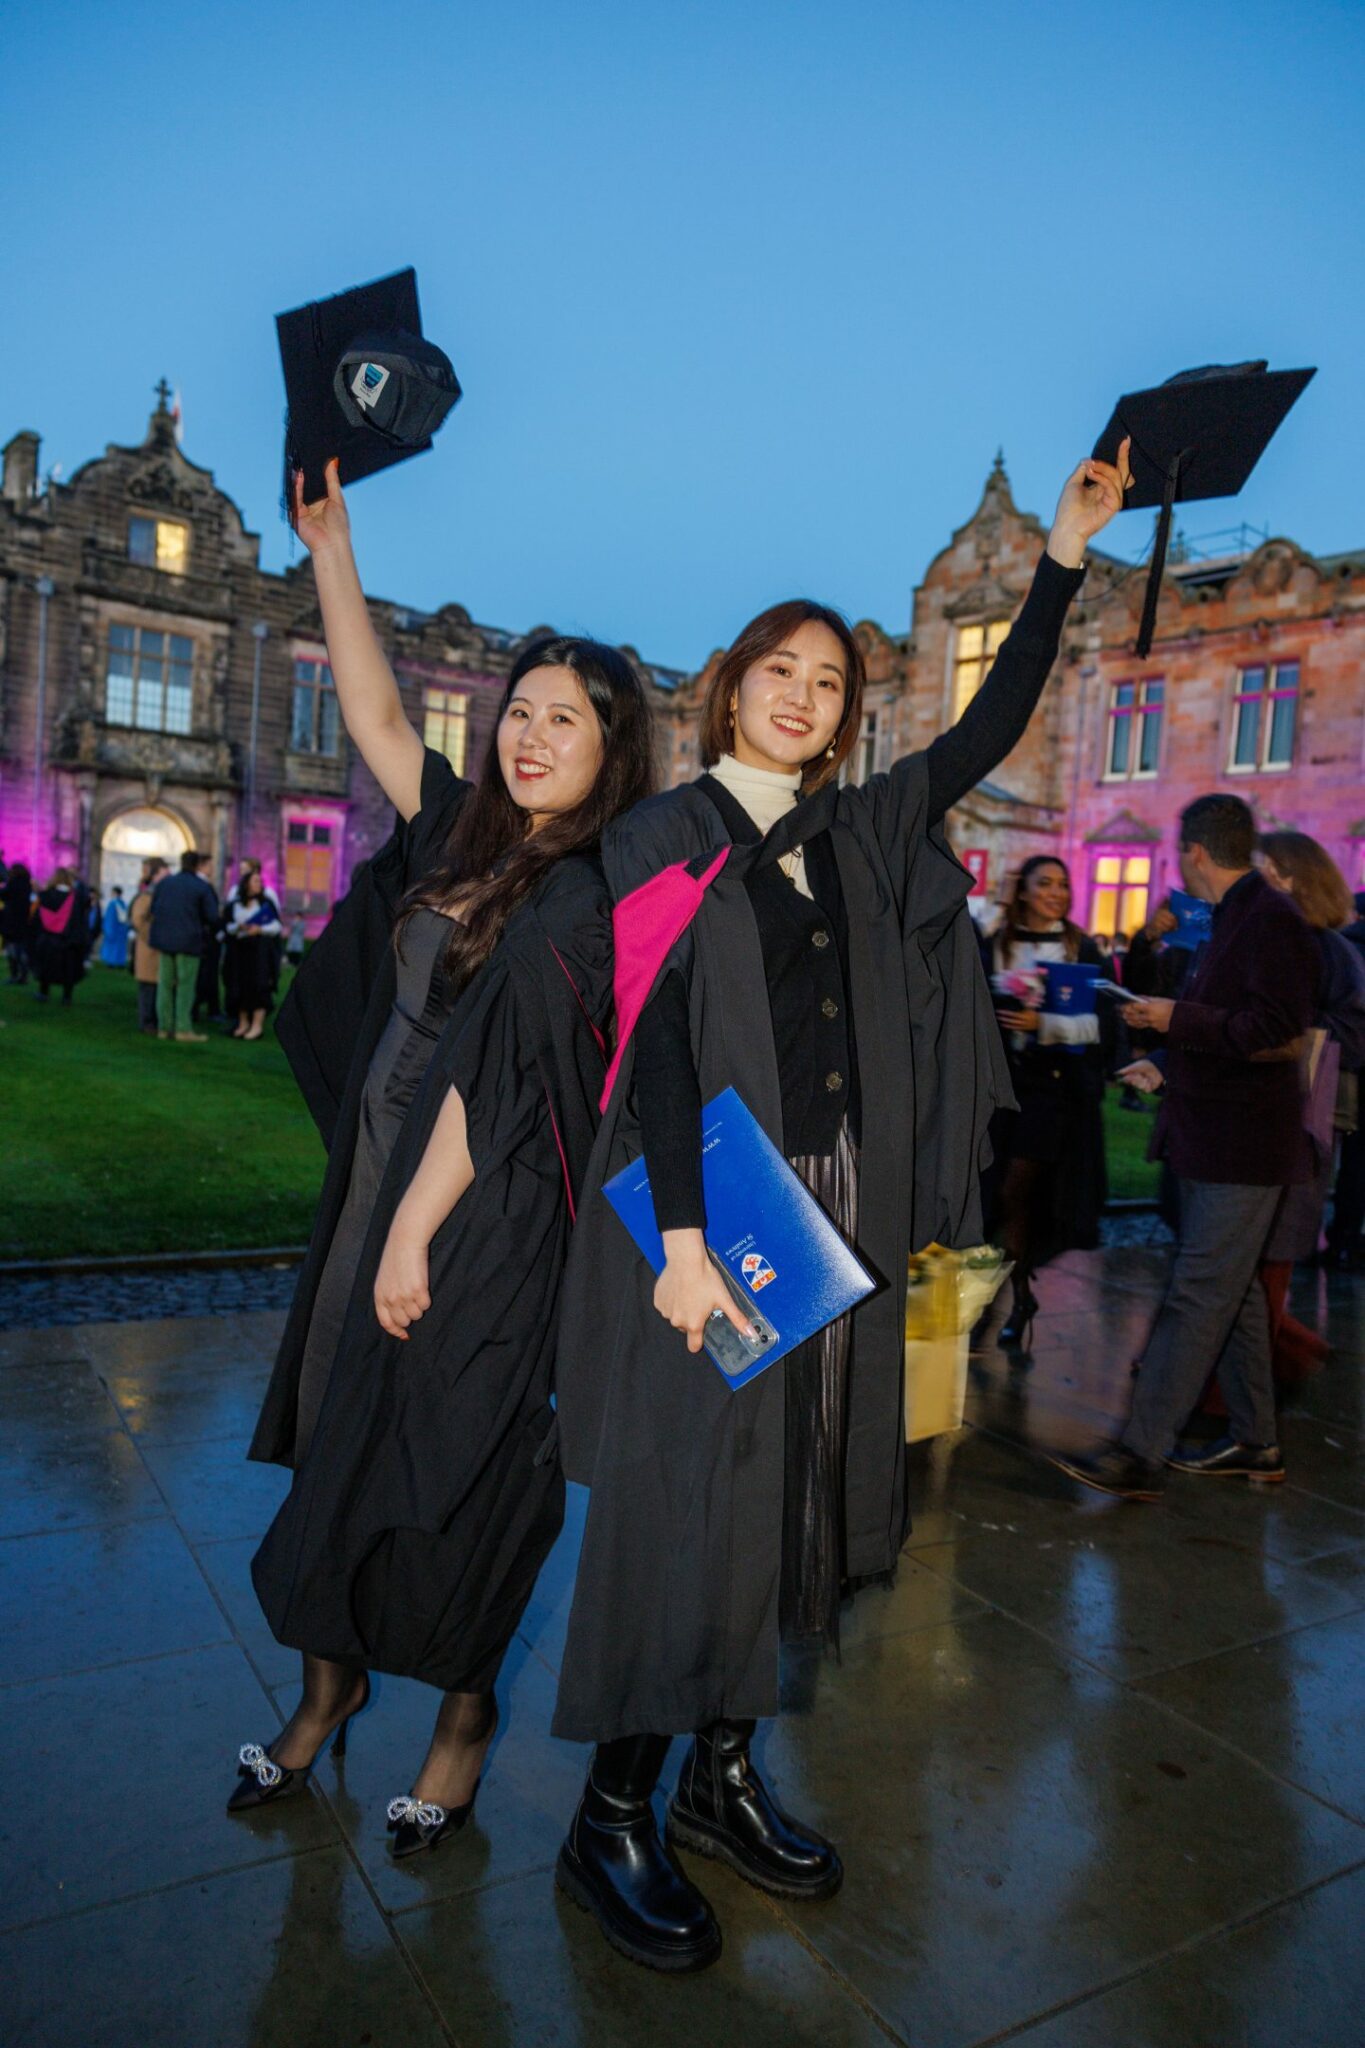 First day of St Andrews winter graduation ceremonies